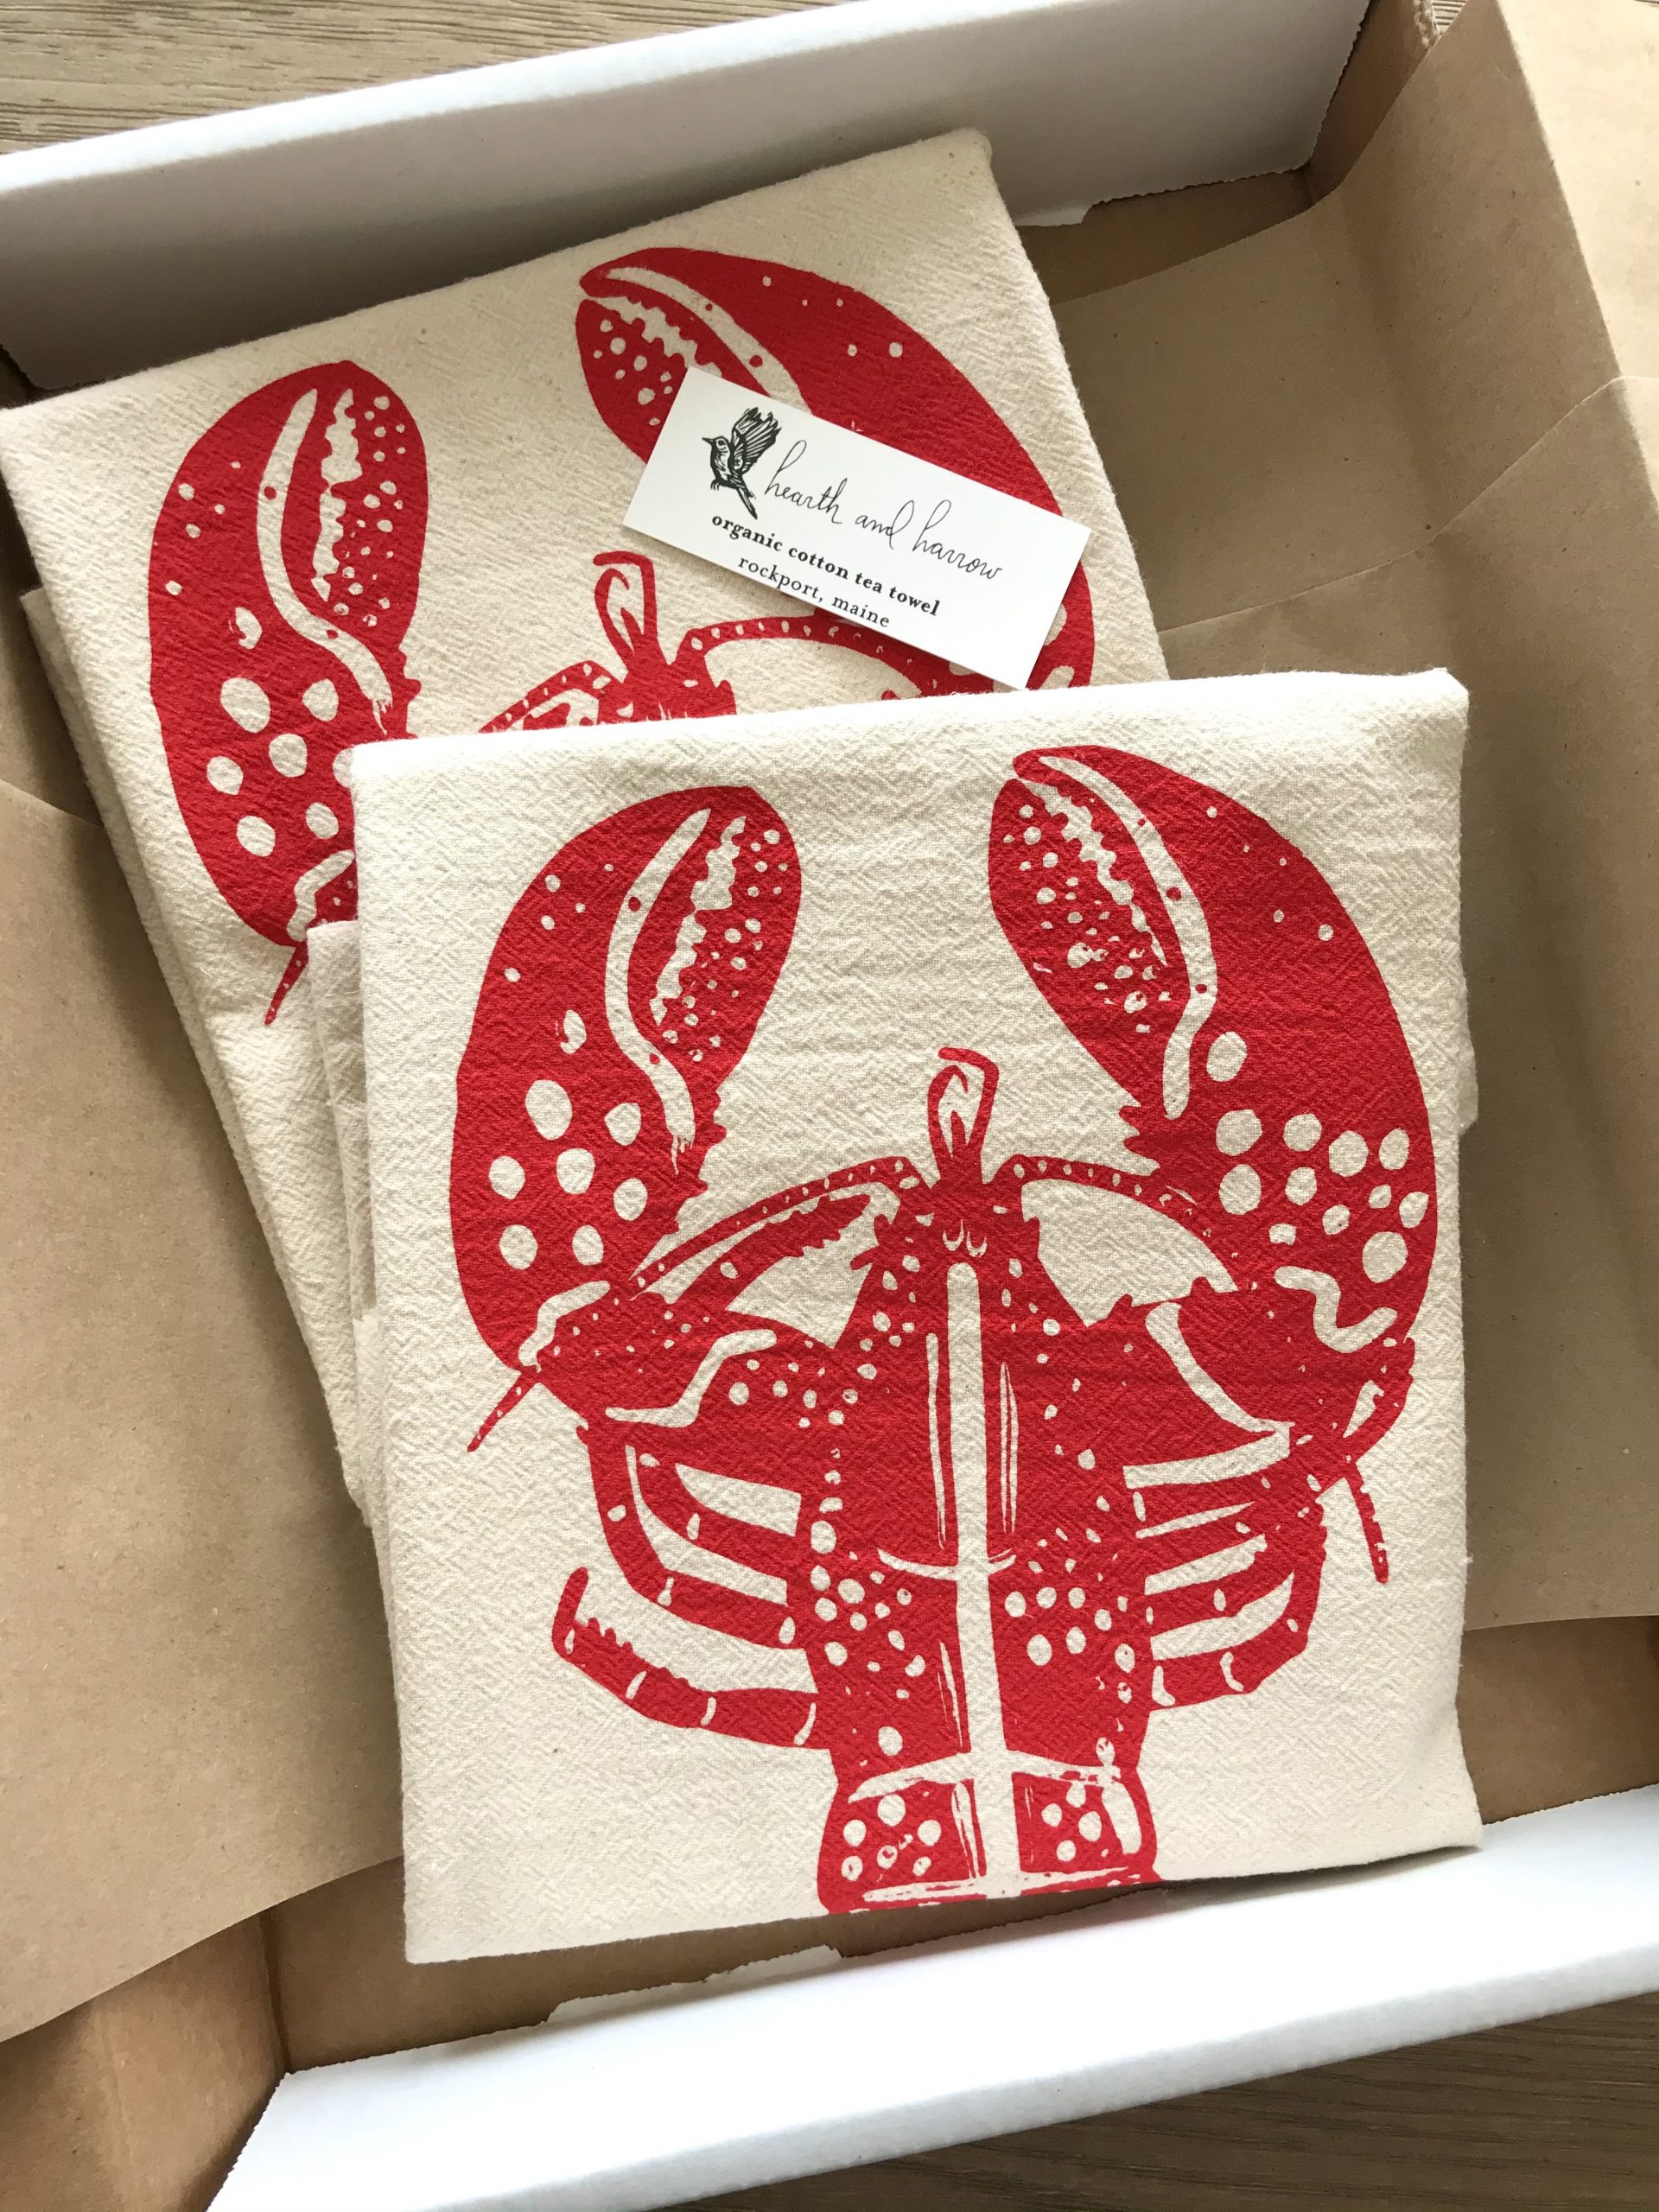 Made in Rockport, Maine – Hearth and Harrow Tea Towel Giveaway